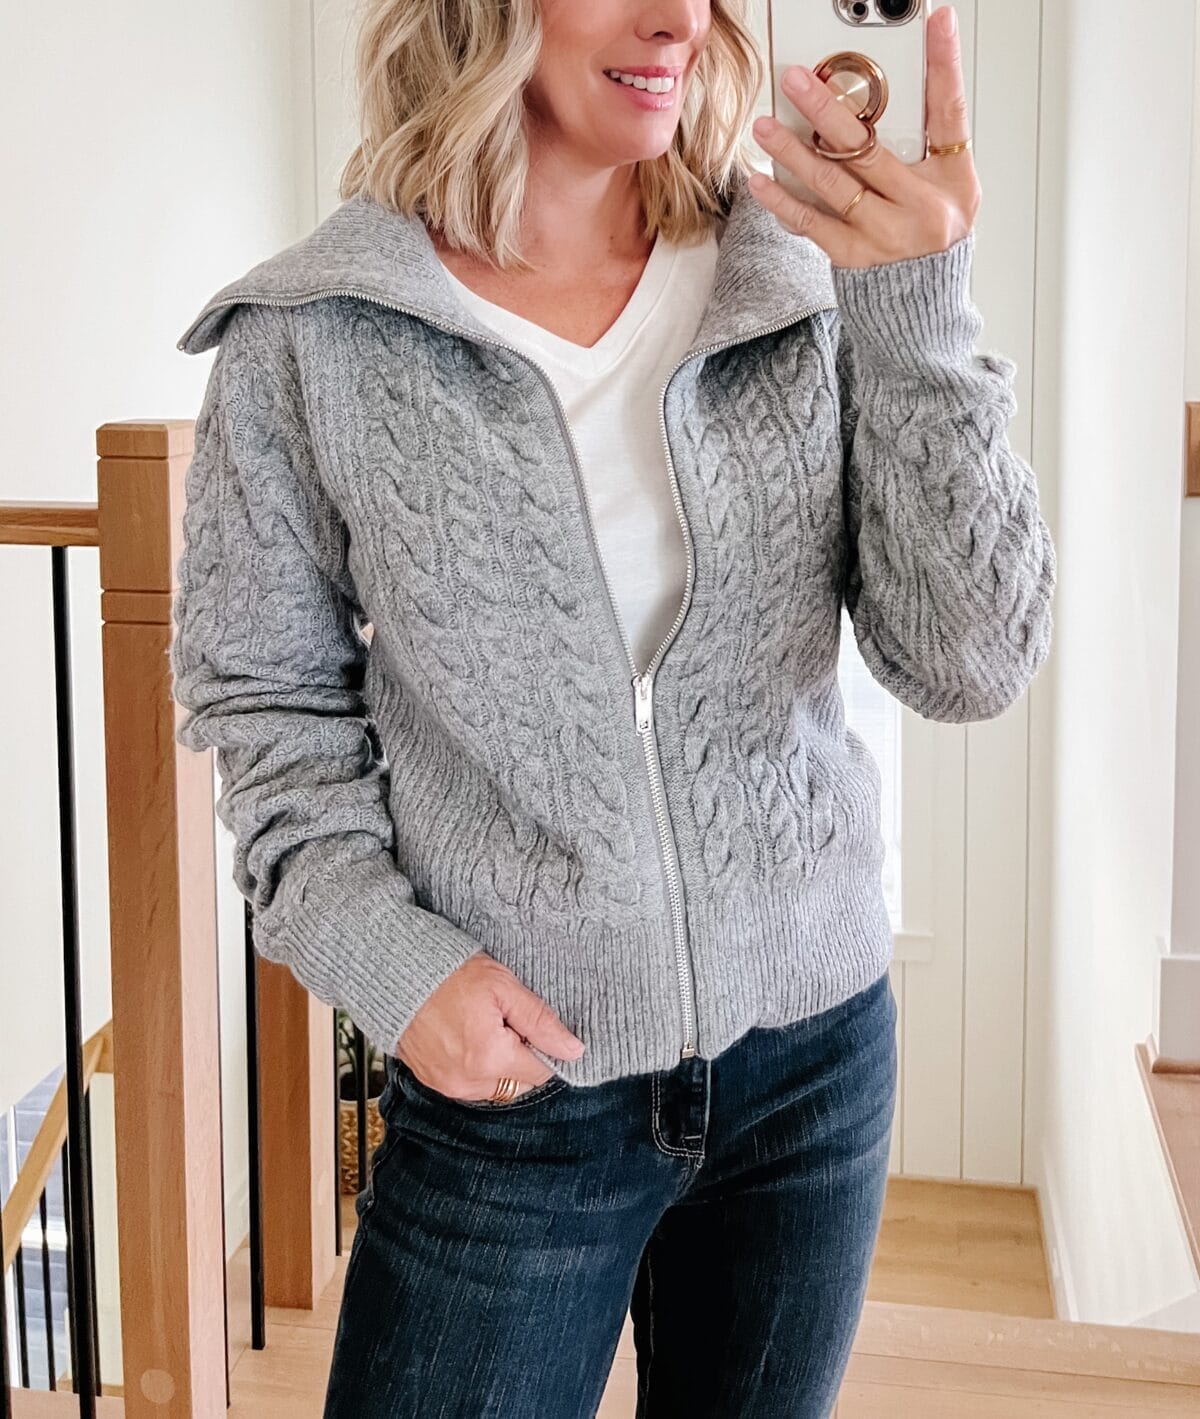 Walmart zip cardigan and jeans outfit
